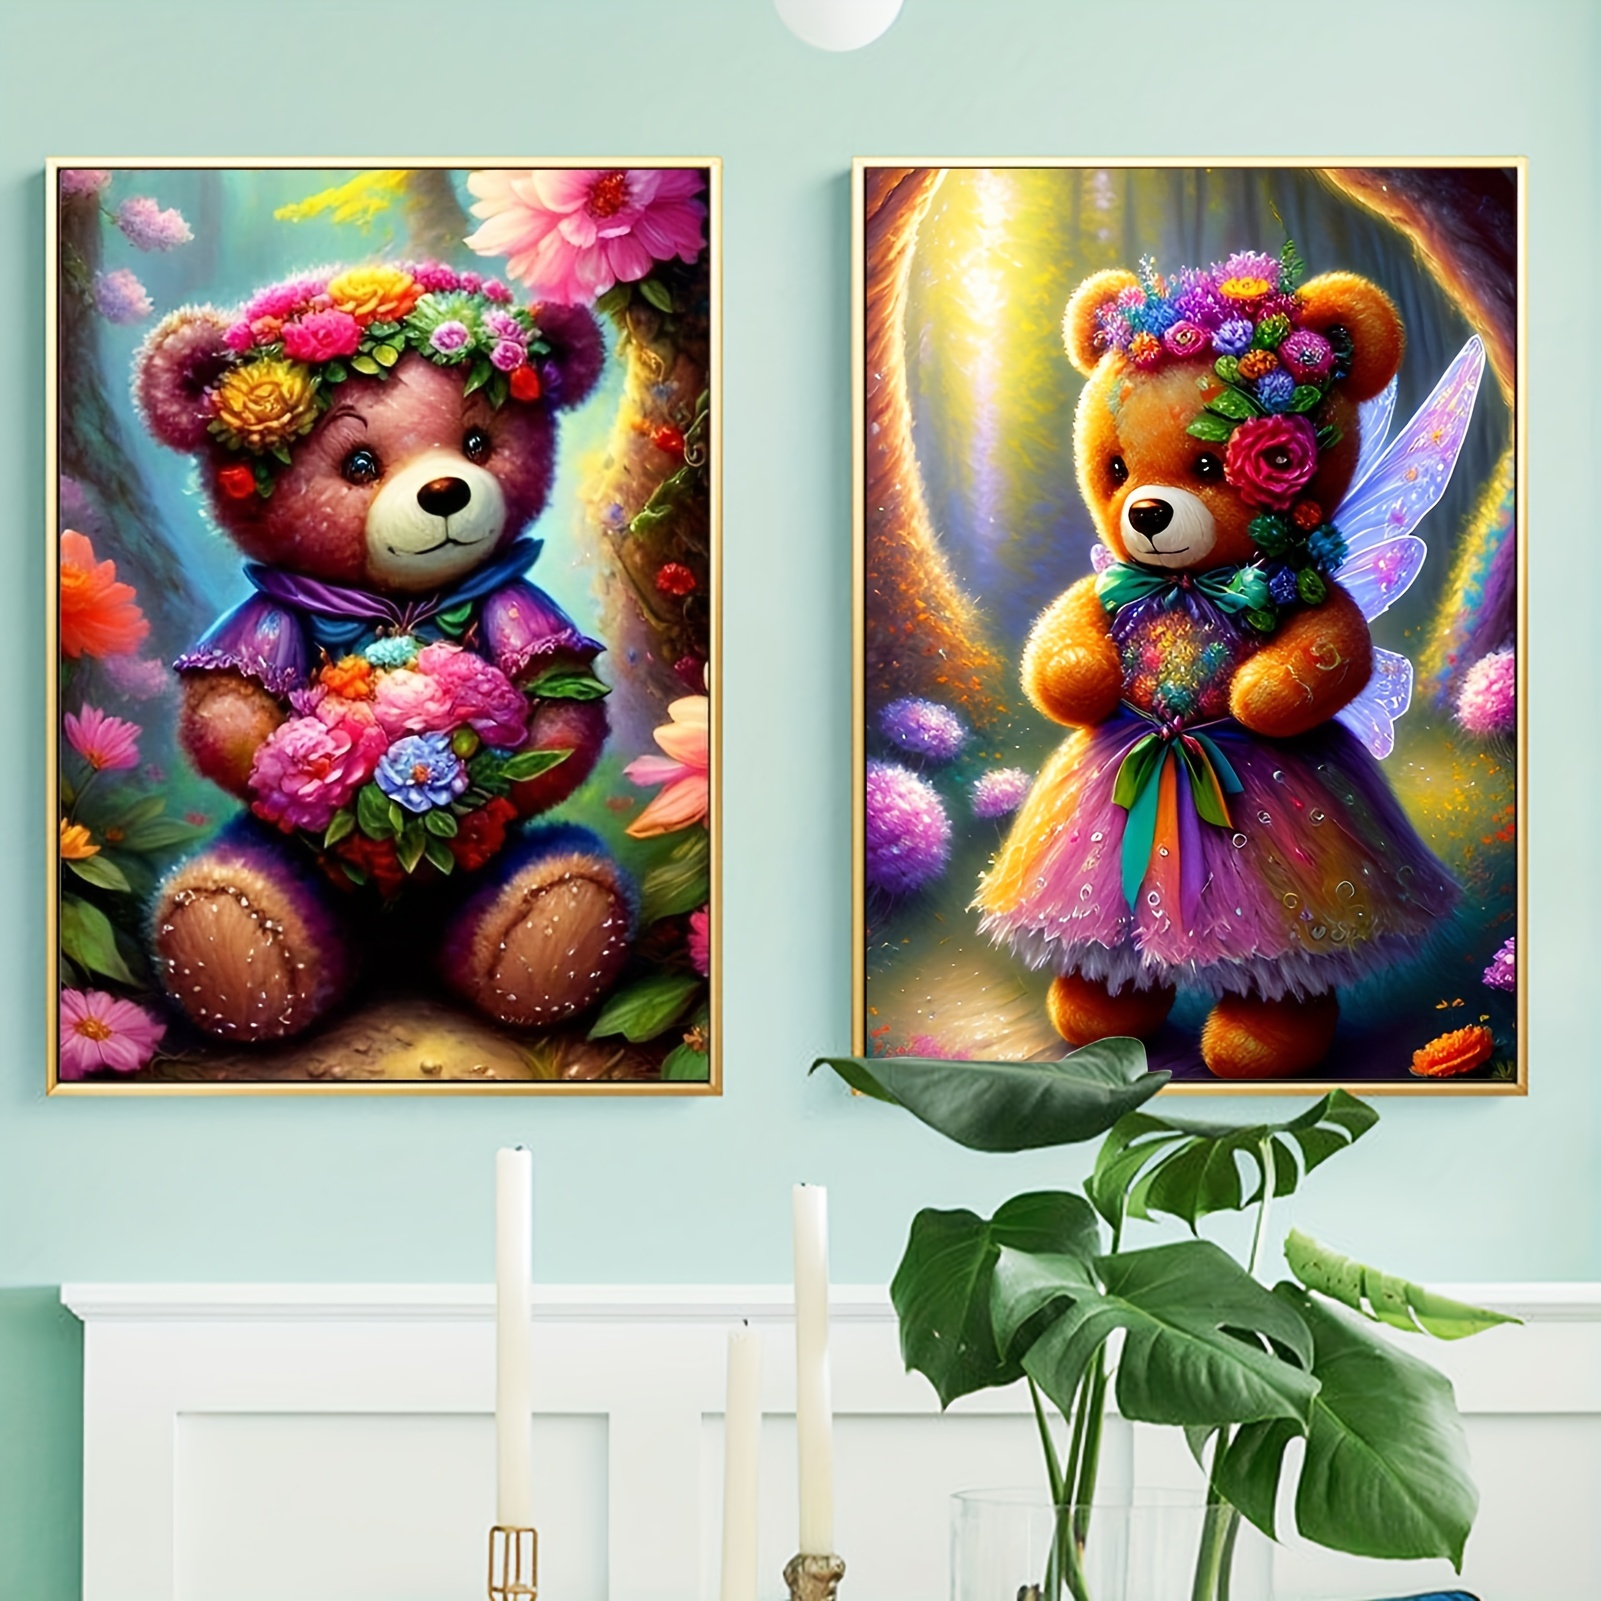 NAIMOER Valentines Diamond Painting Kits for Adults Kids, Full Drill Bear  Diamond Painting Kits Love Diamond Art Kits 5D Valentines Diamond Arts  Pictures Arts Craft for Home Decor (12x16 inch) : Buy